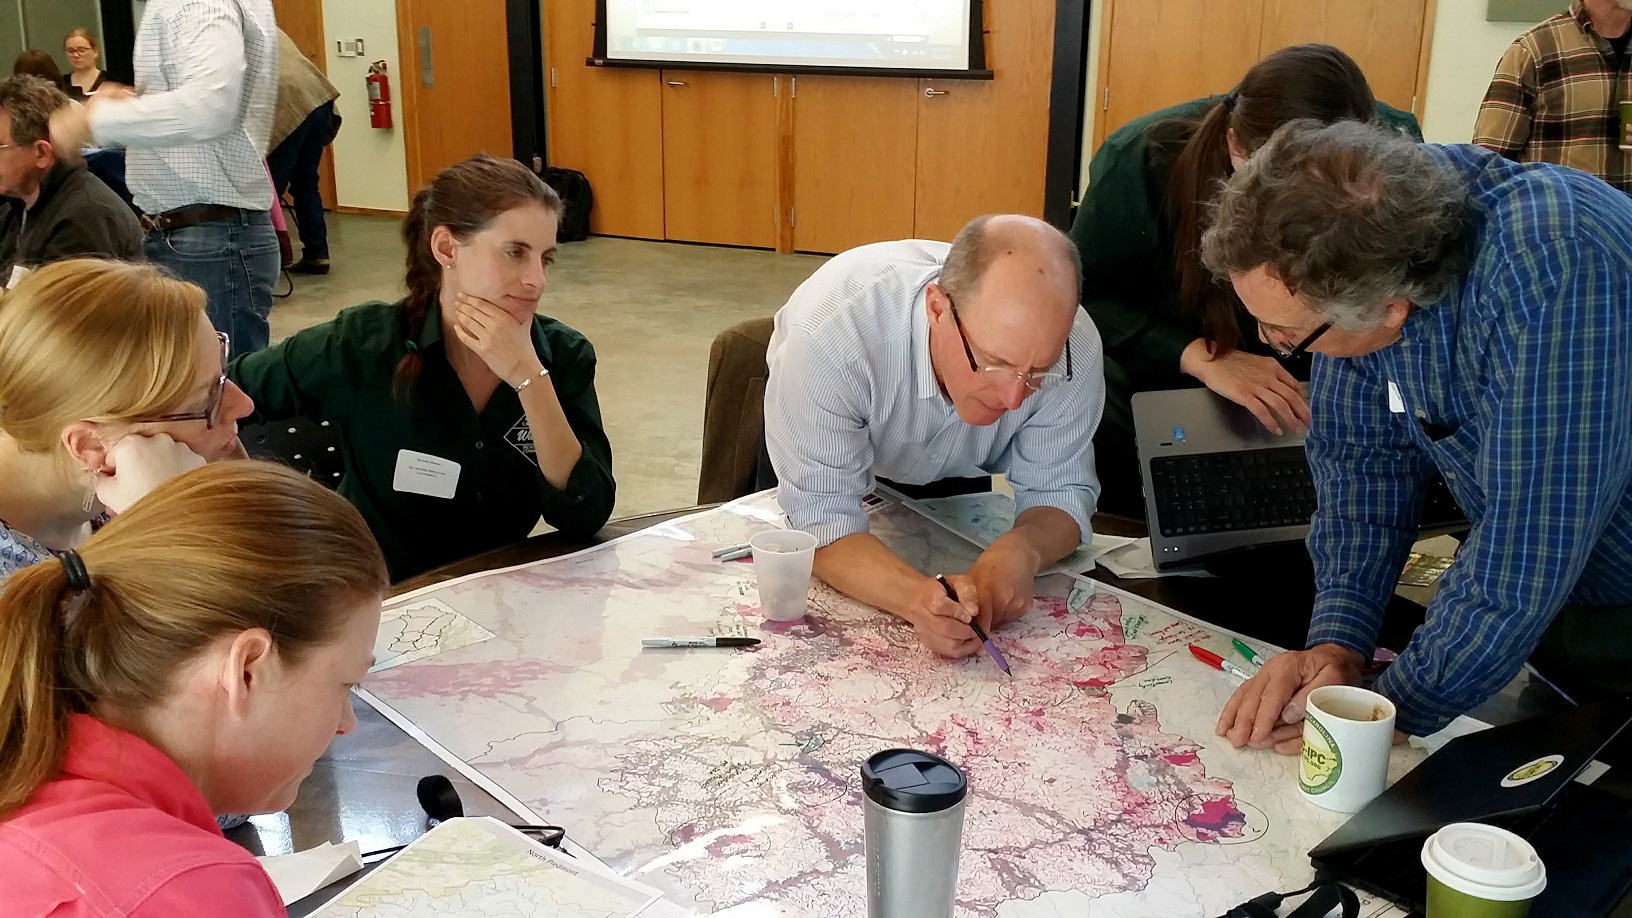 A group of conservation professionals investigating a map.